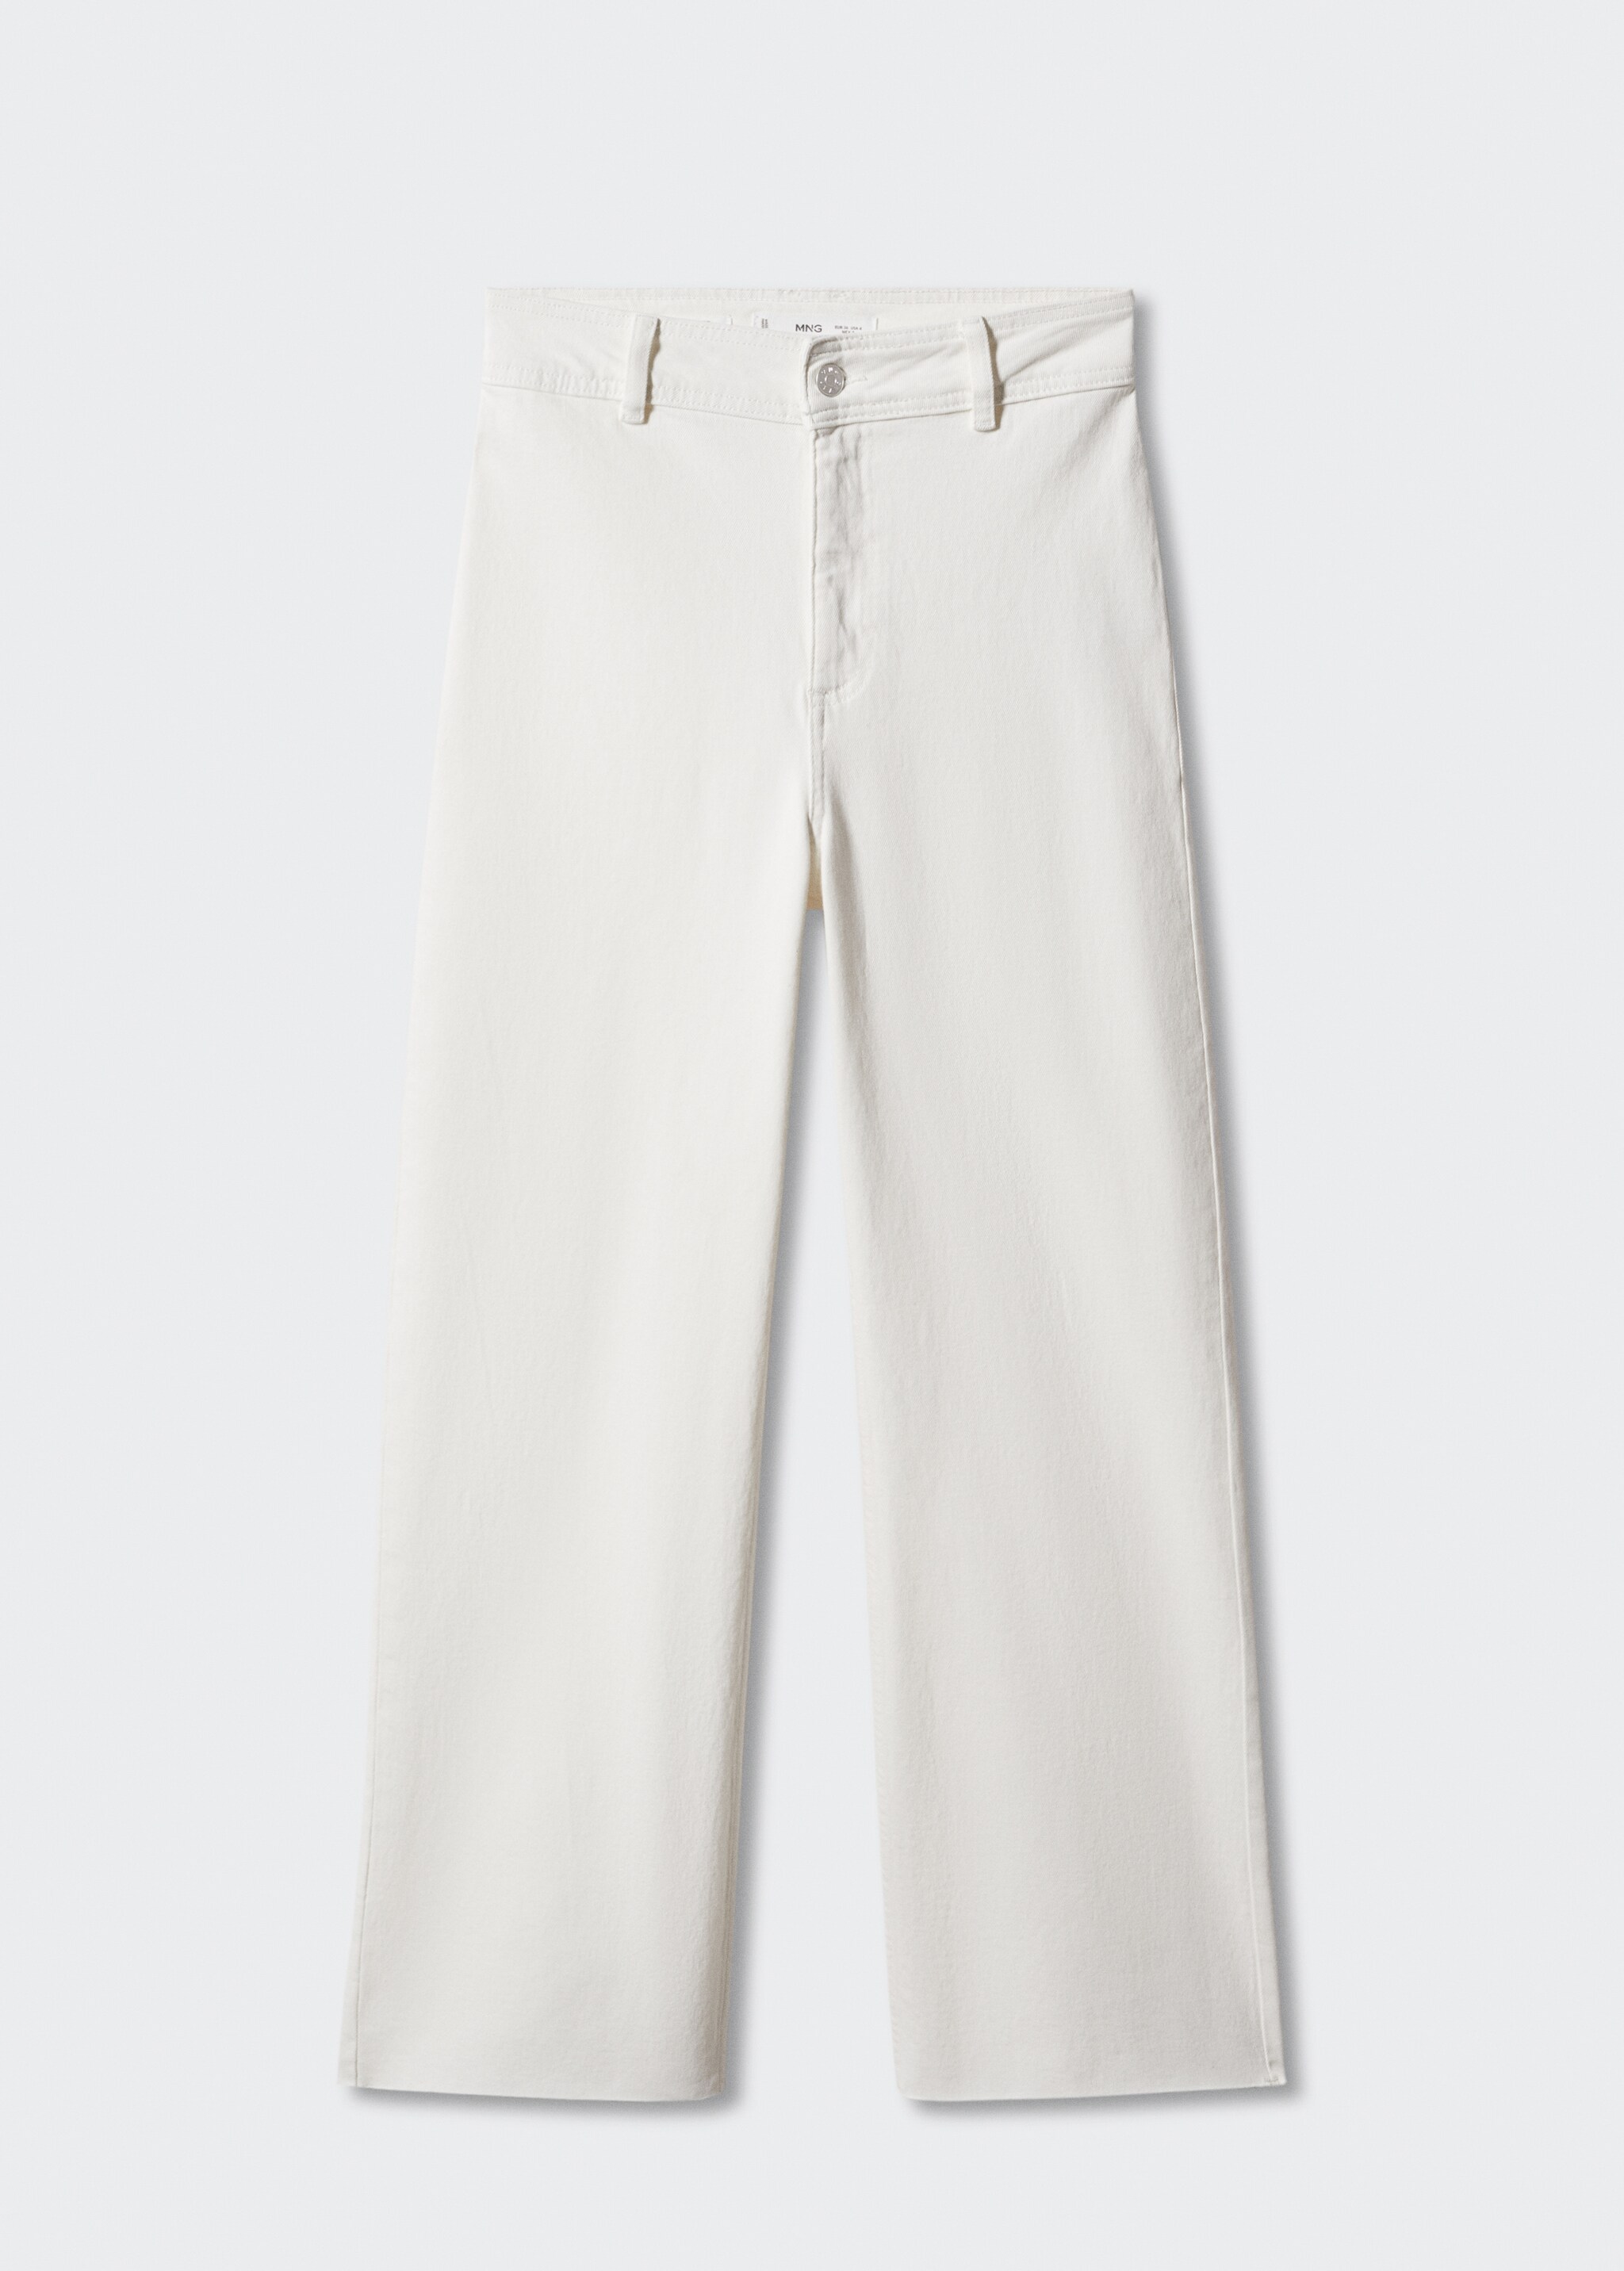 Catherin culotte high rise jeans - Article without model